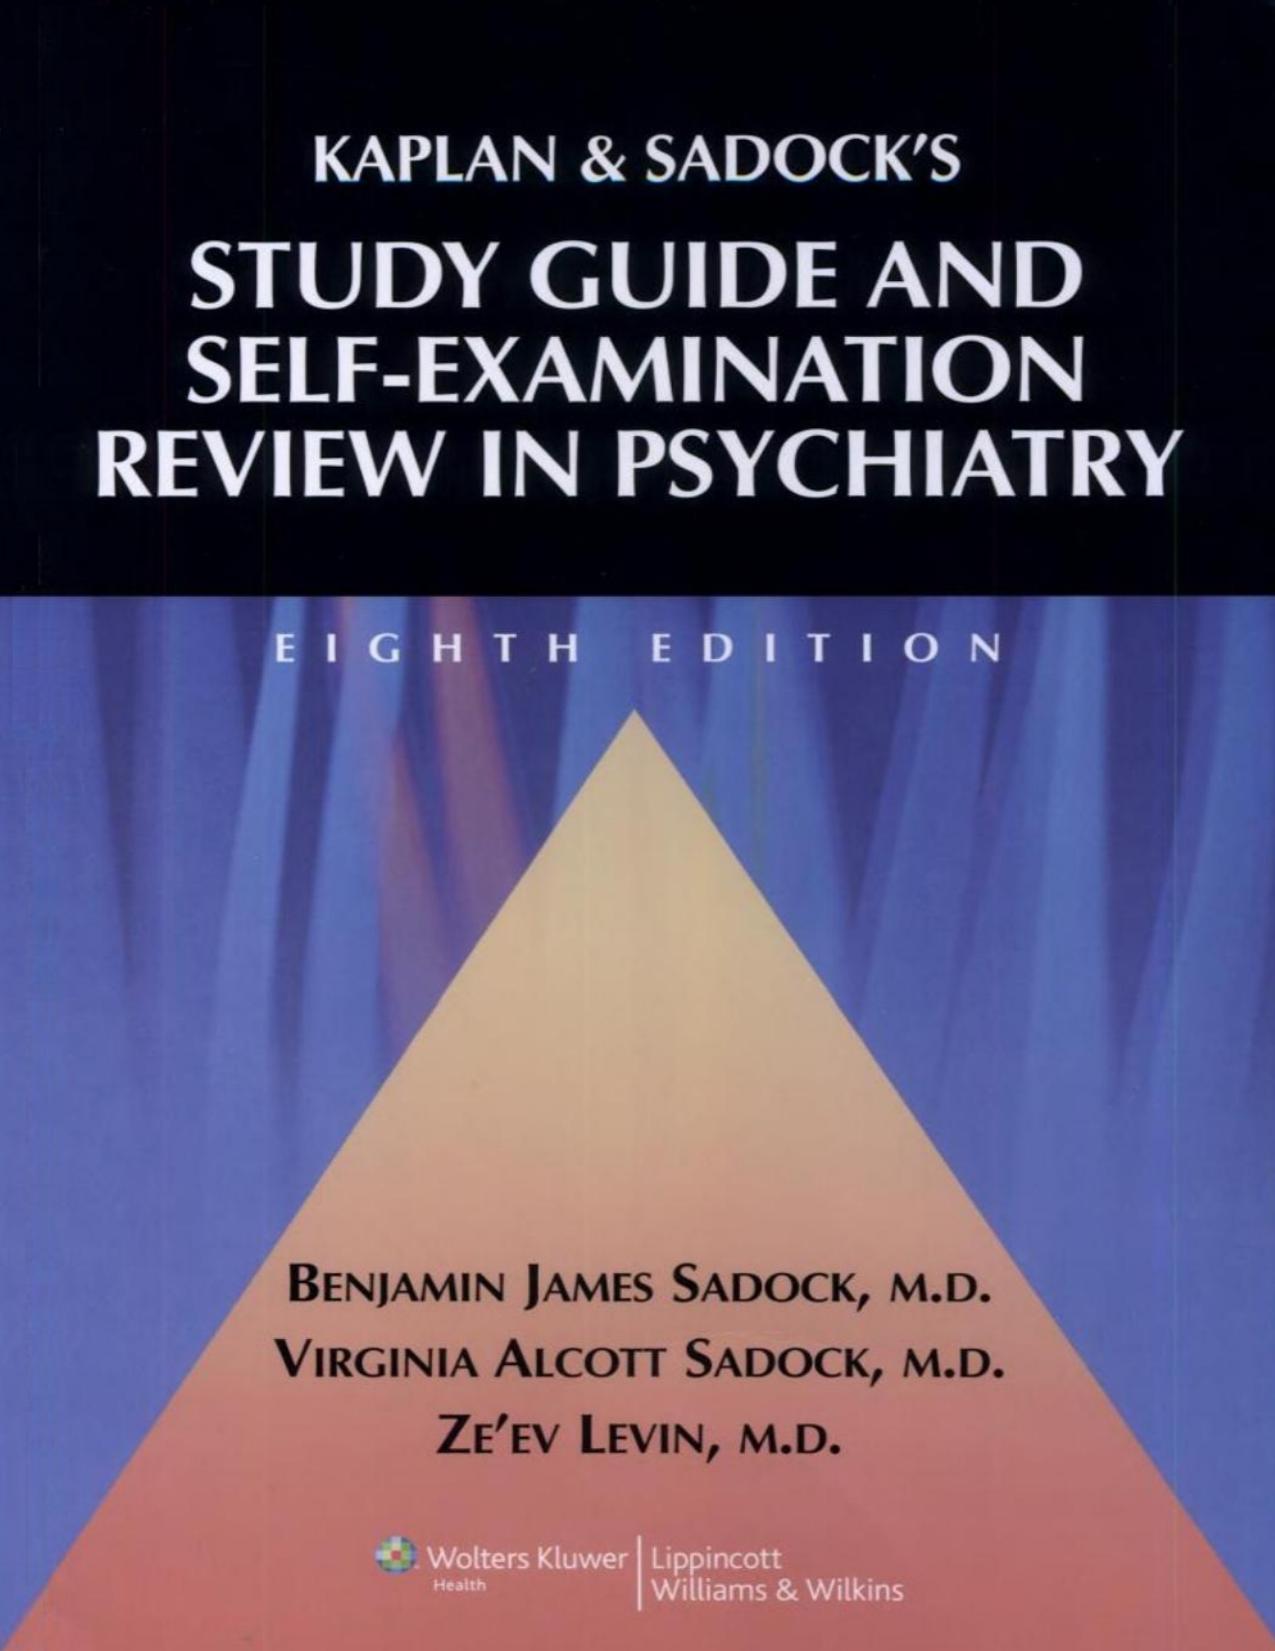 Kaplan & Sadock’s Study Guide and Self Examination Review in Psychiatry, 8th Edition